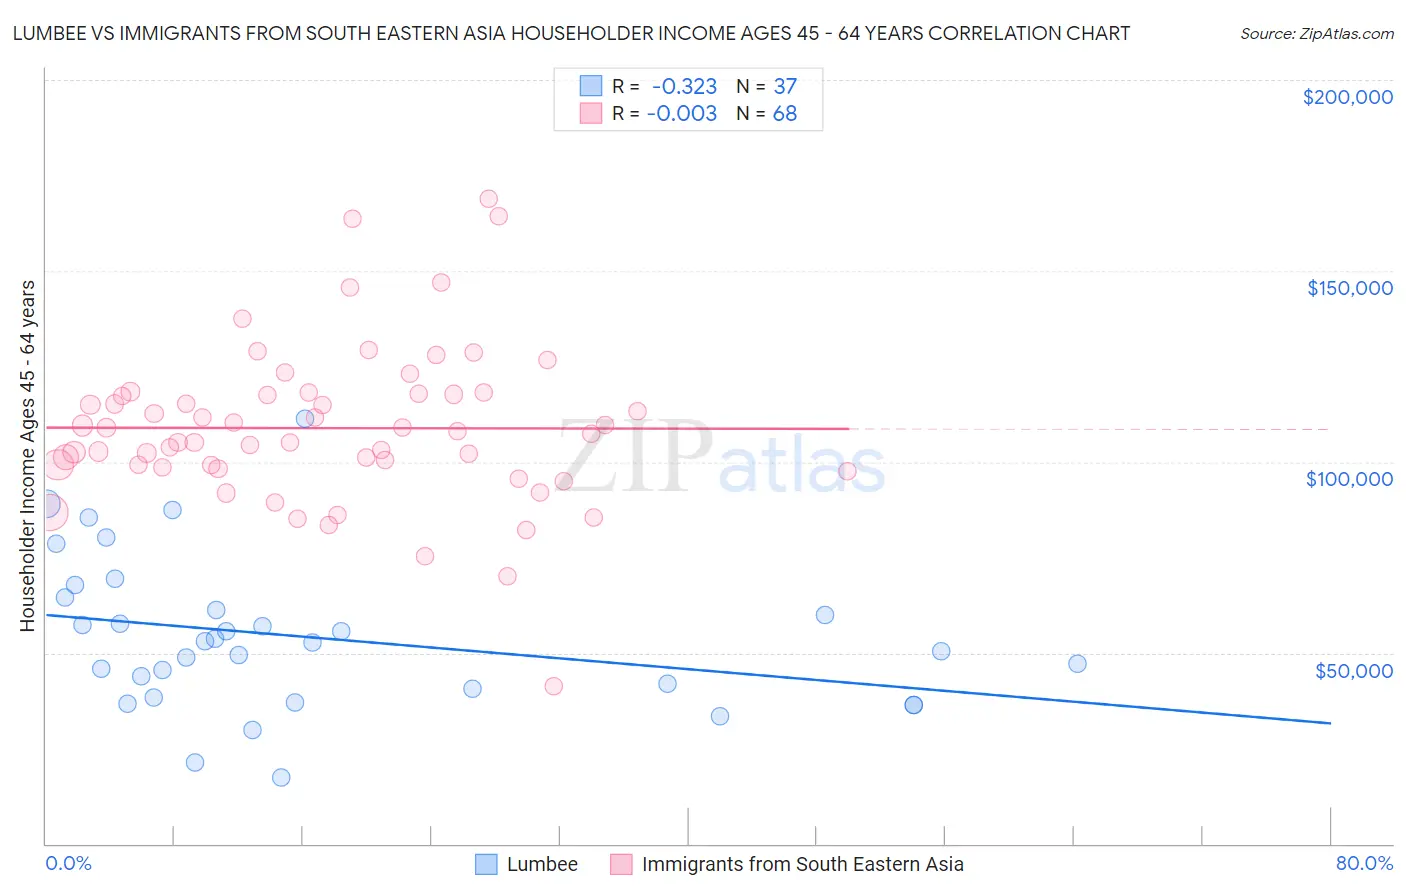 Lumbee vs Immigrants from South Eastern Asia Householder Income Ages 45 - 64 years